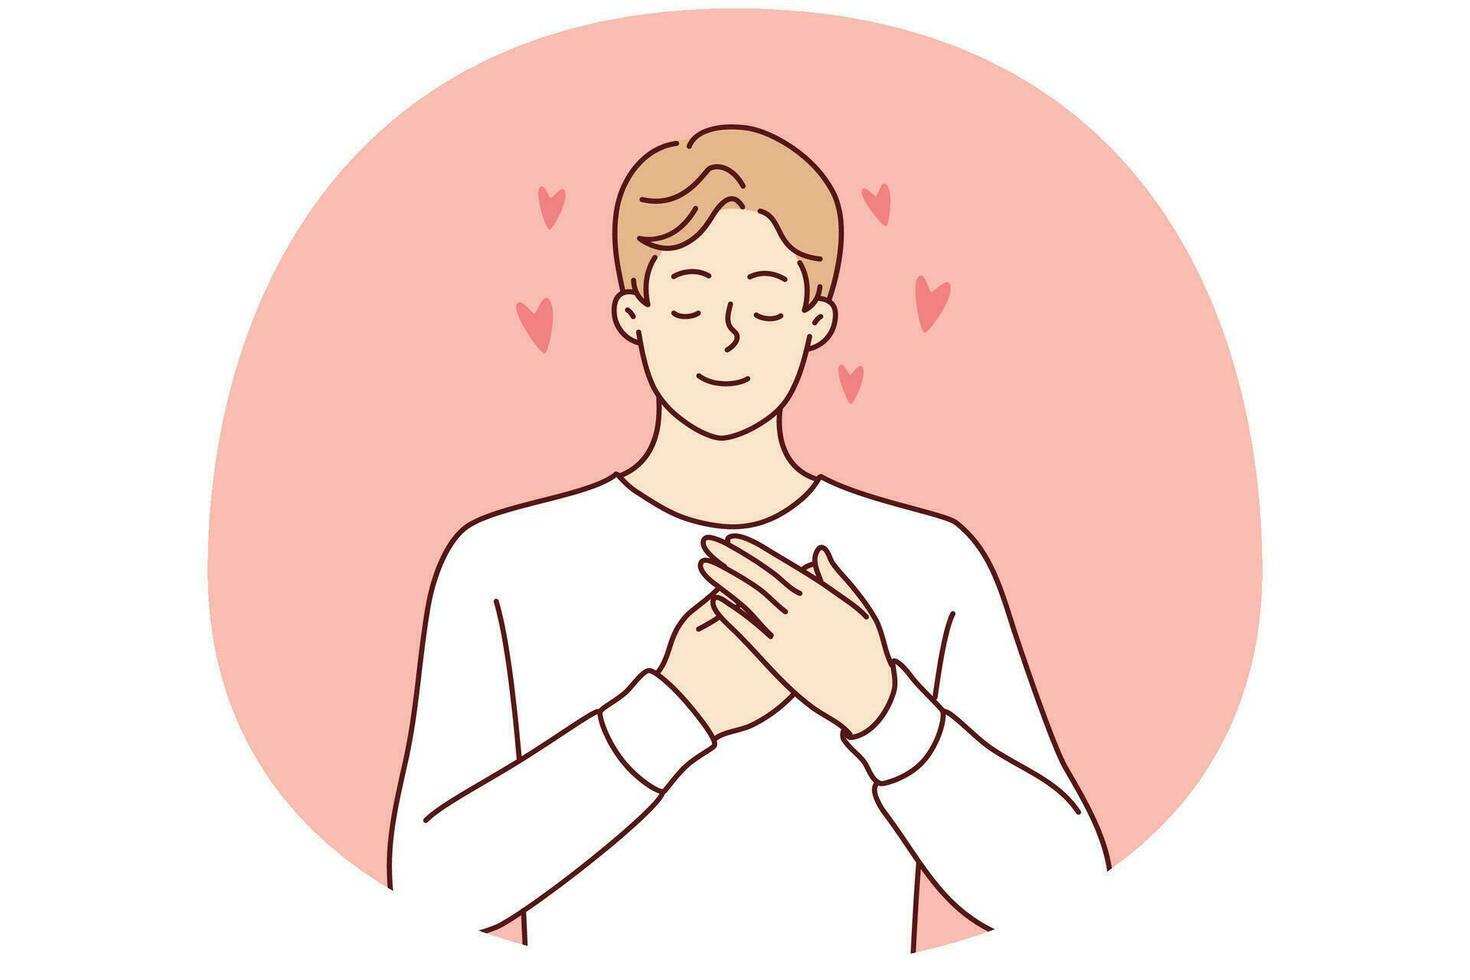 Enamored man puts hands on chest and closes eyes remembering girlfriend. Vector image